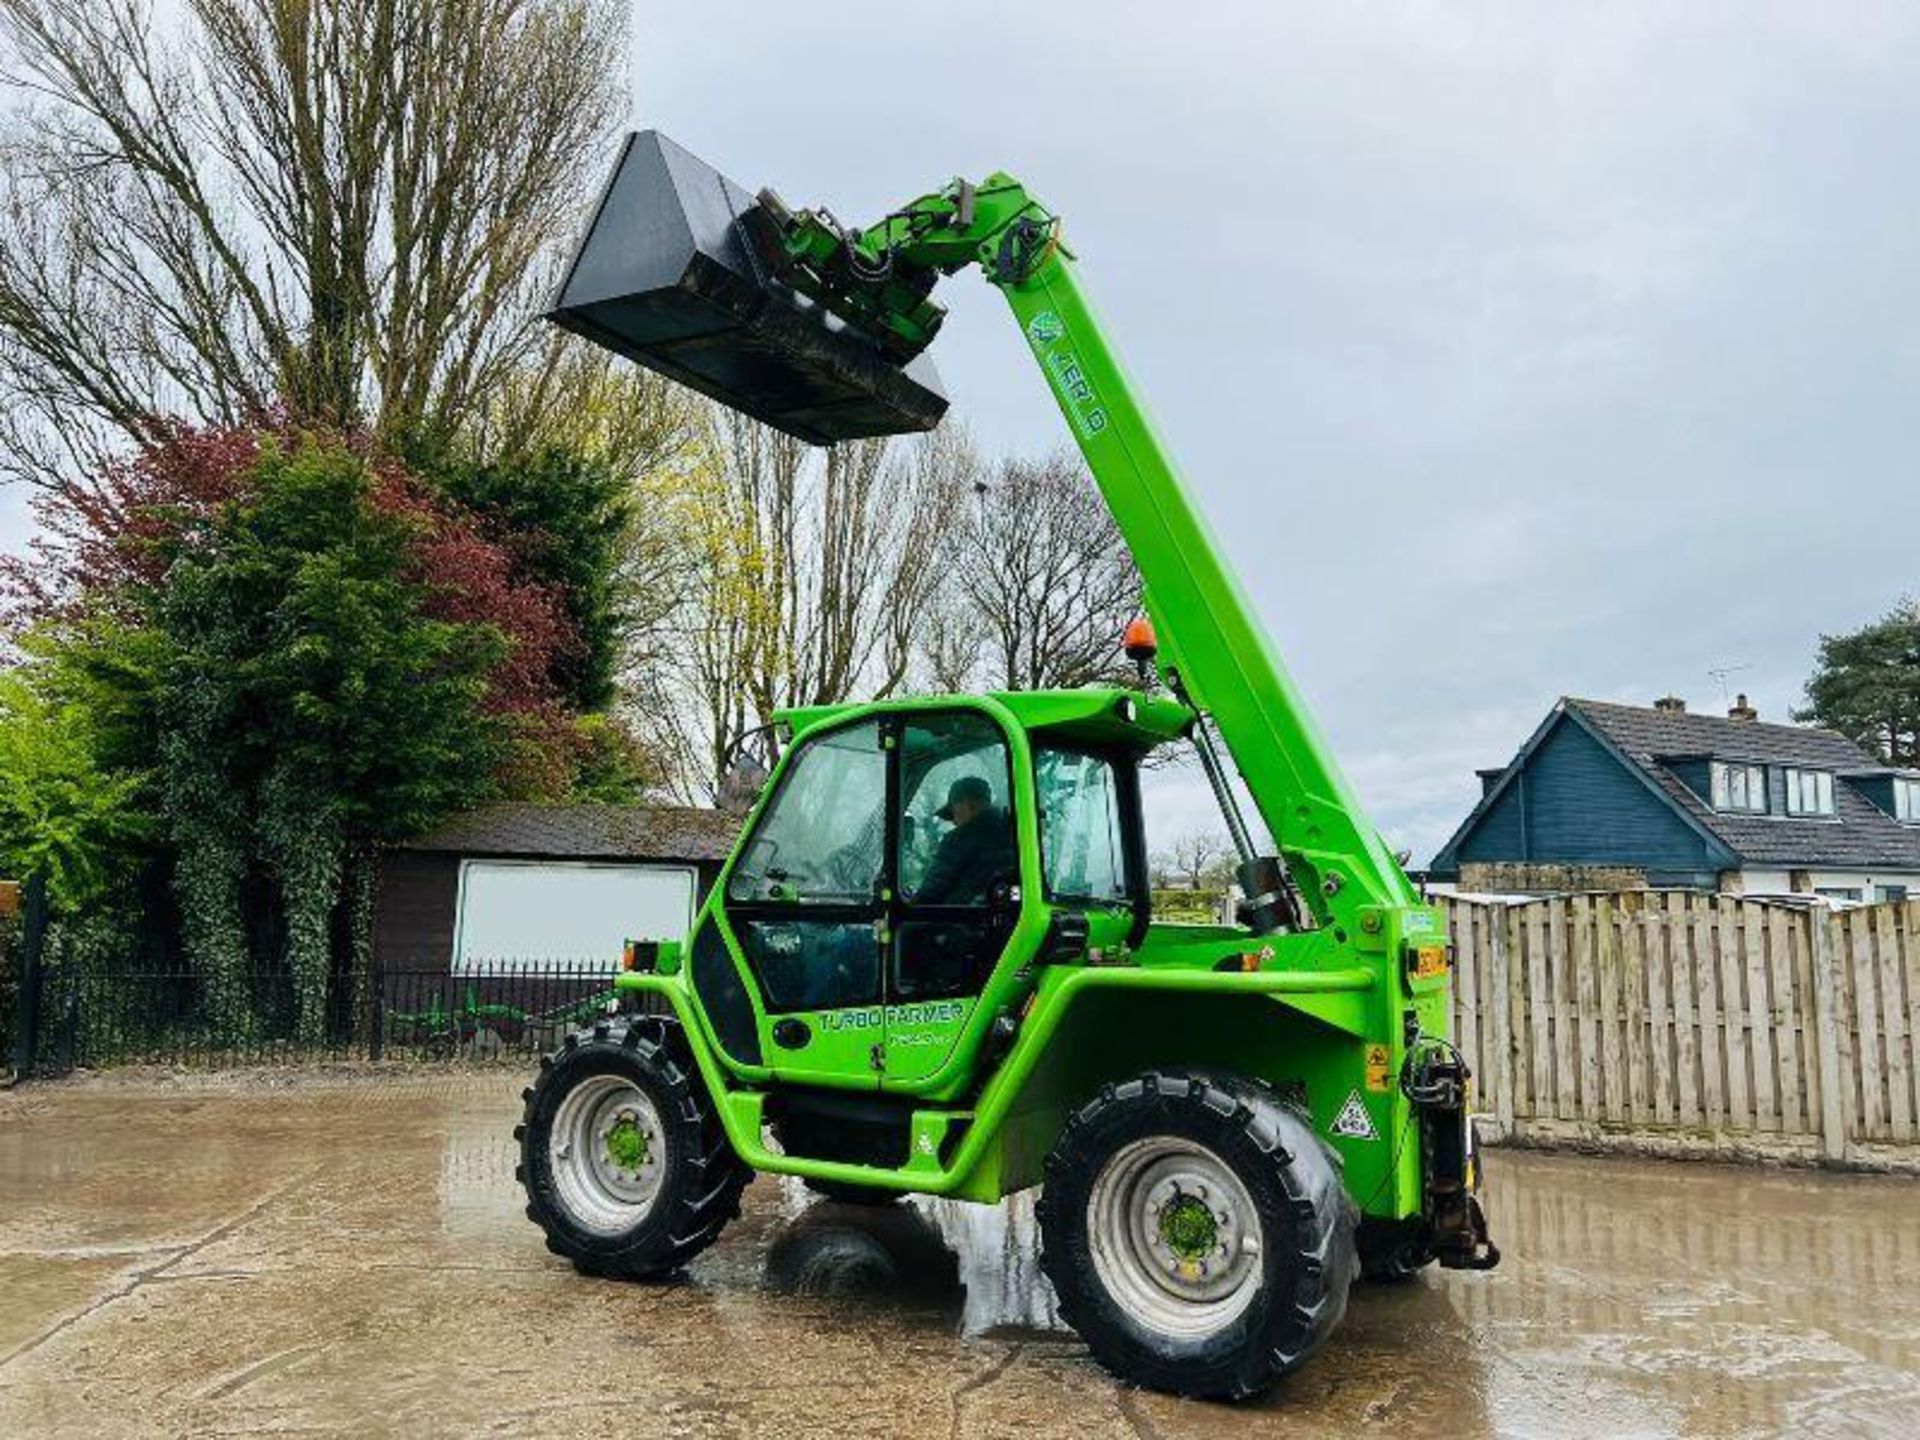 MERLO P34.7 4WD TELEHANDLER*YEAR 2013, AG SPEC* C/W PICK UP HITCH - Image 8 of 20